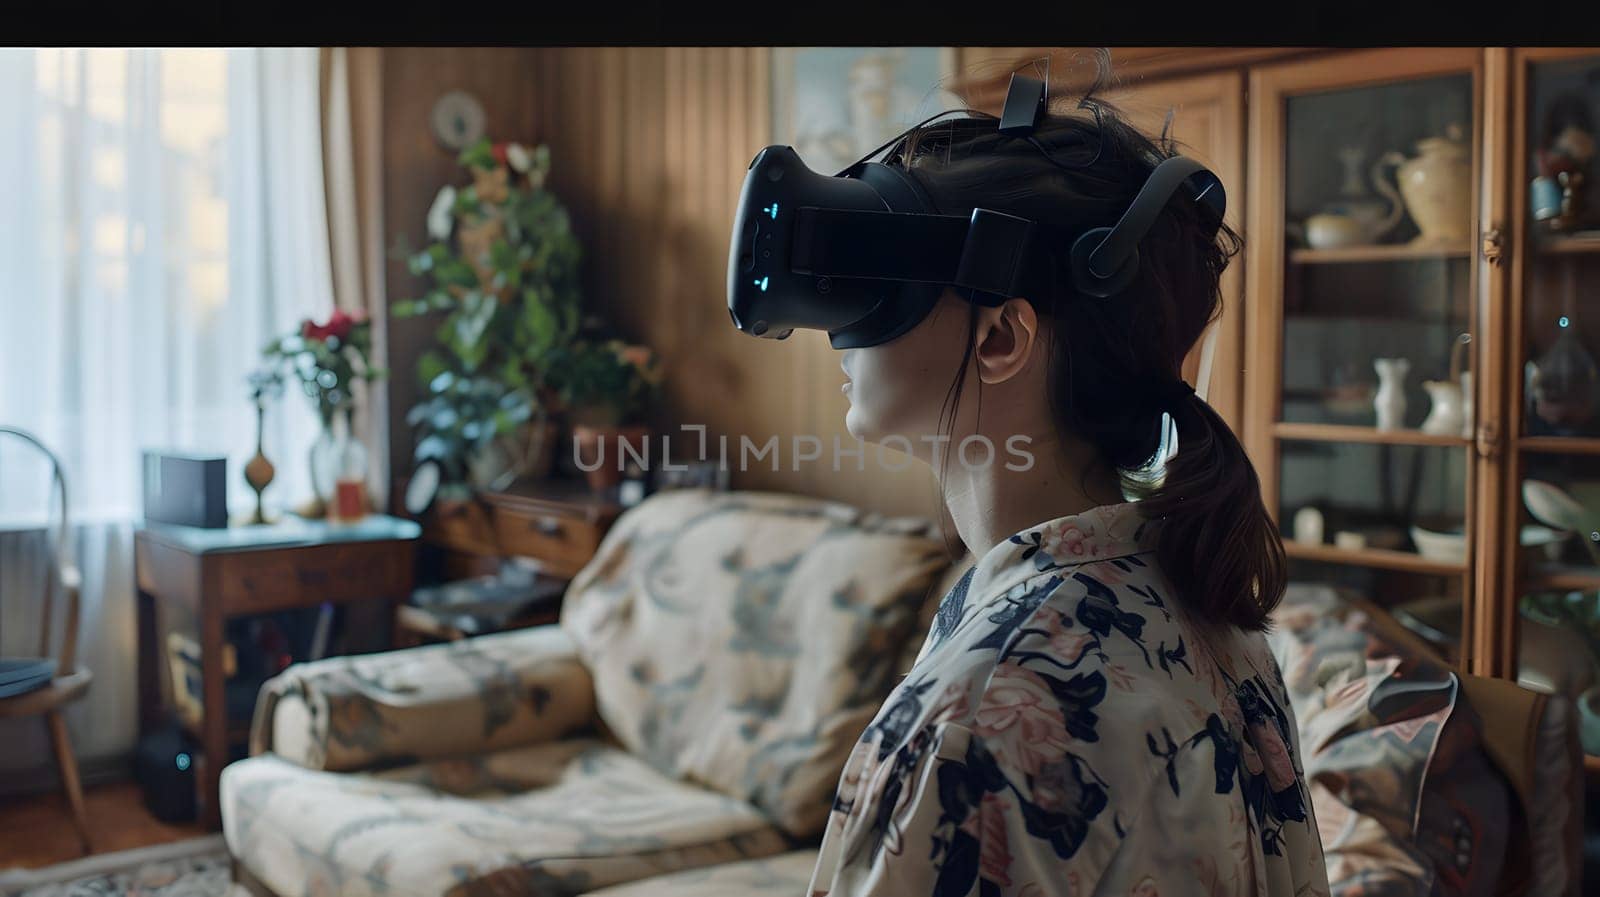 A woman is immersed in virtual reality while sitting on a comfy couch in a living room filled with houseplants and shelves